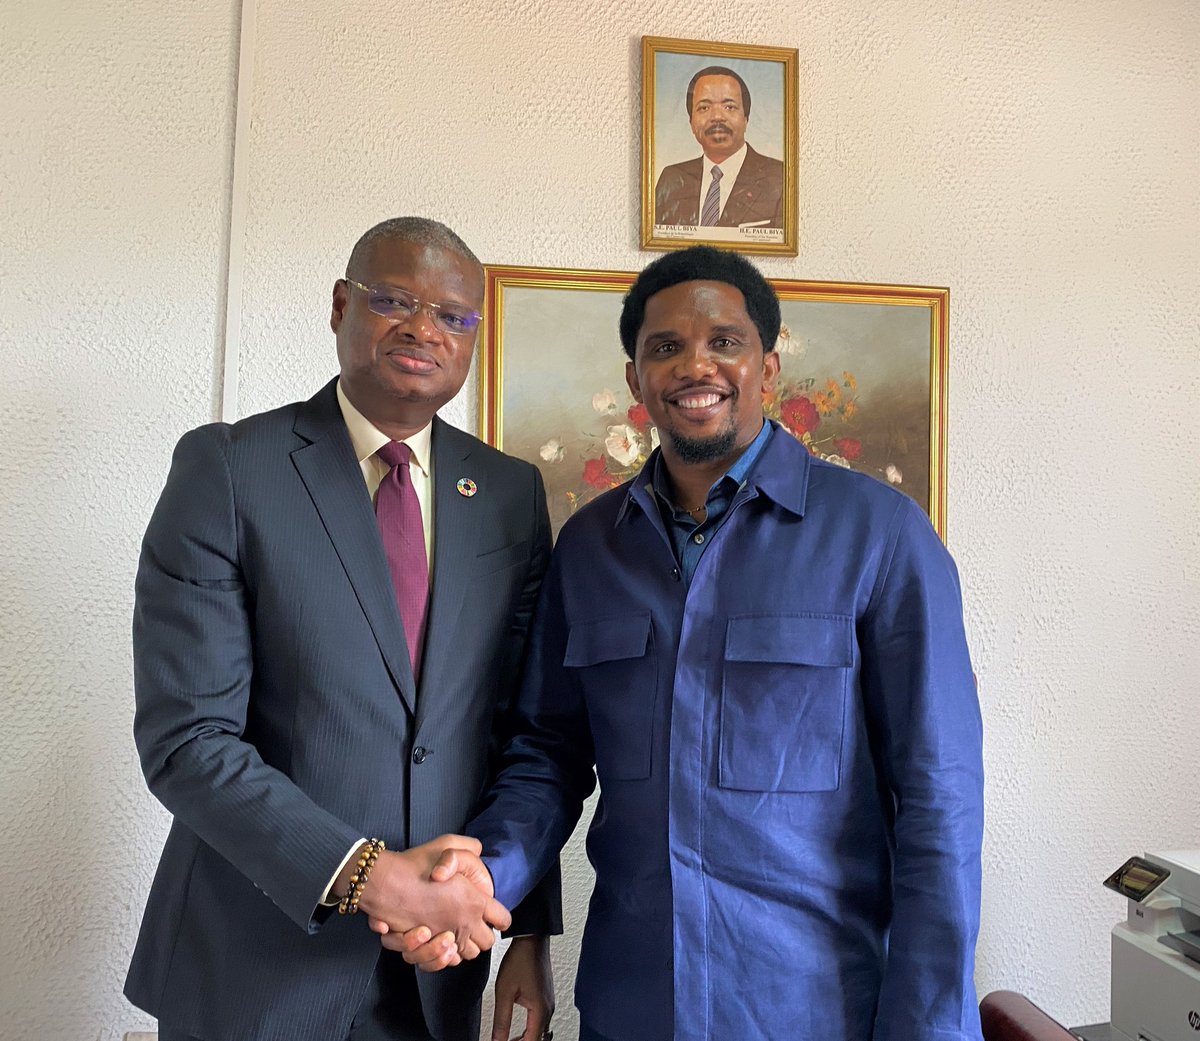 A pleasure to connect with @aliouMdia, Resident Representative of @PNUDCameroun to talk all things #SportsForDevelopment and social equity and cohesion in our great country. Looking forward to collaborating more!